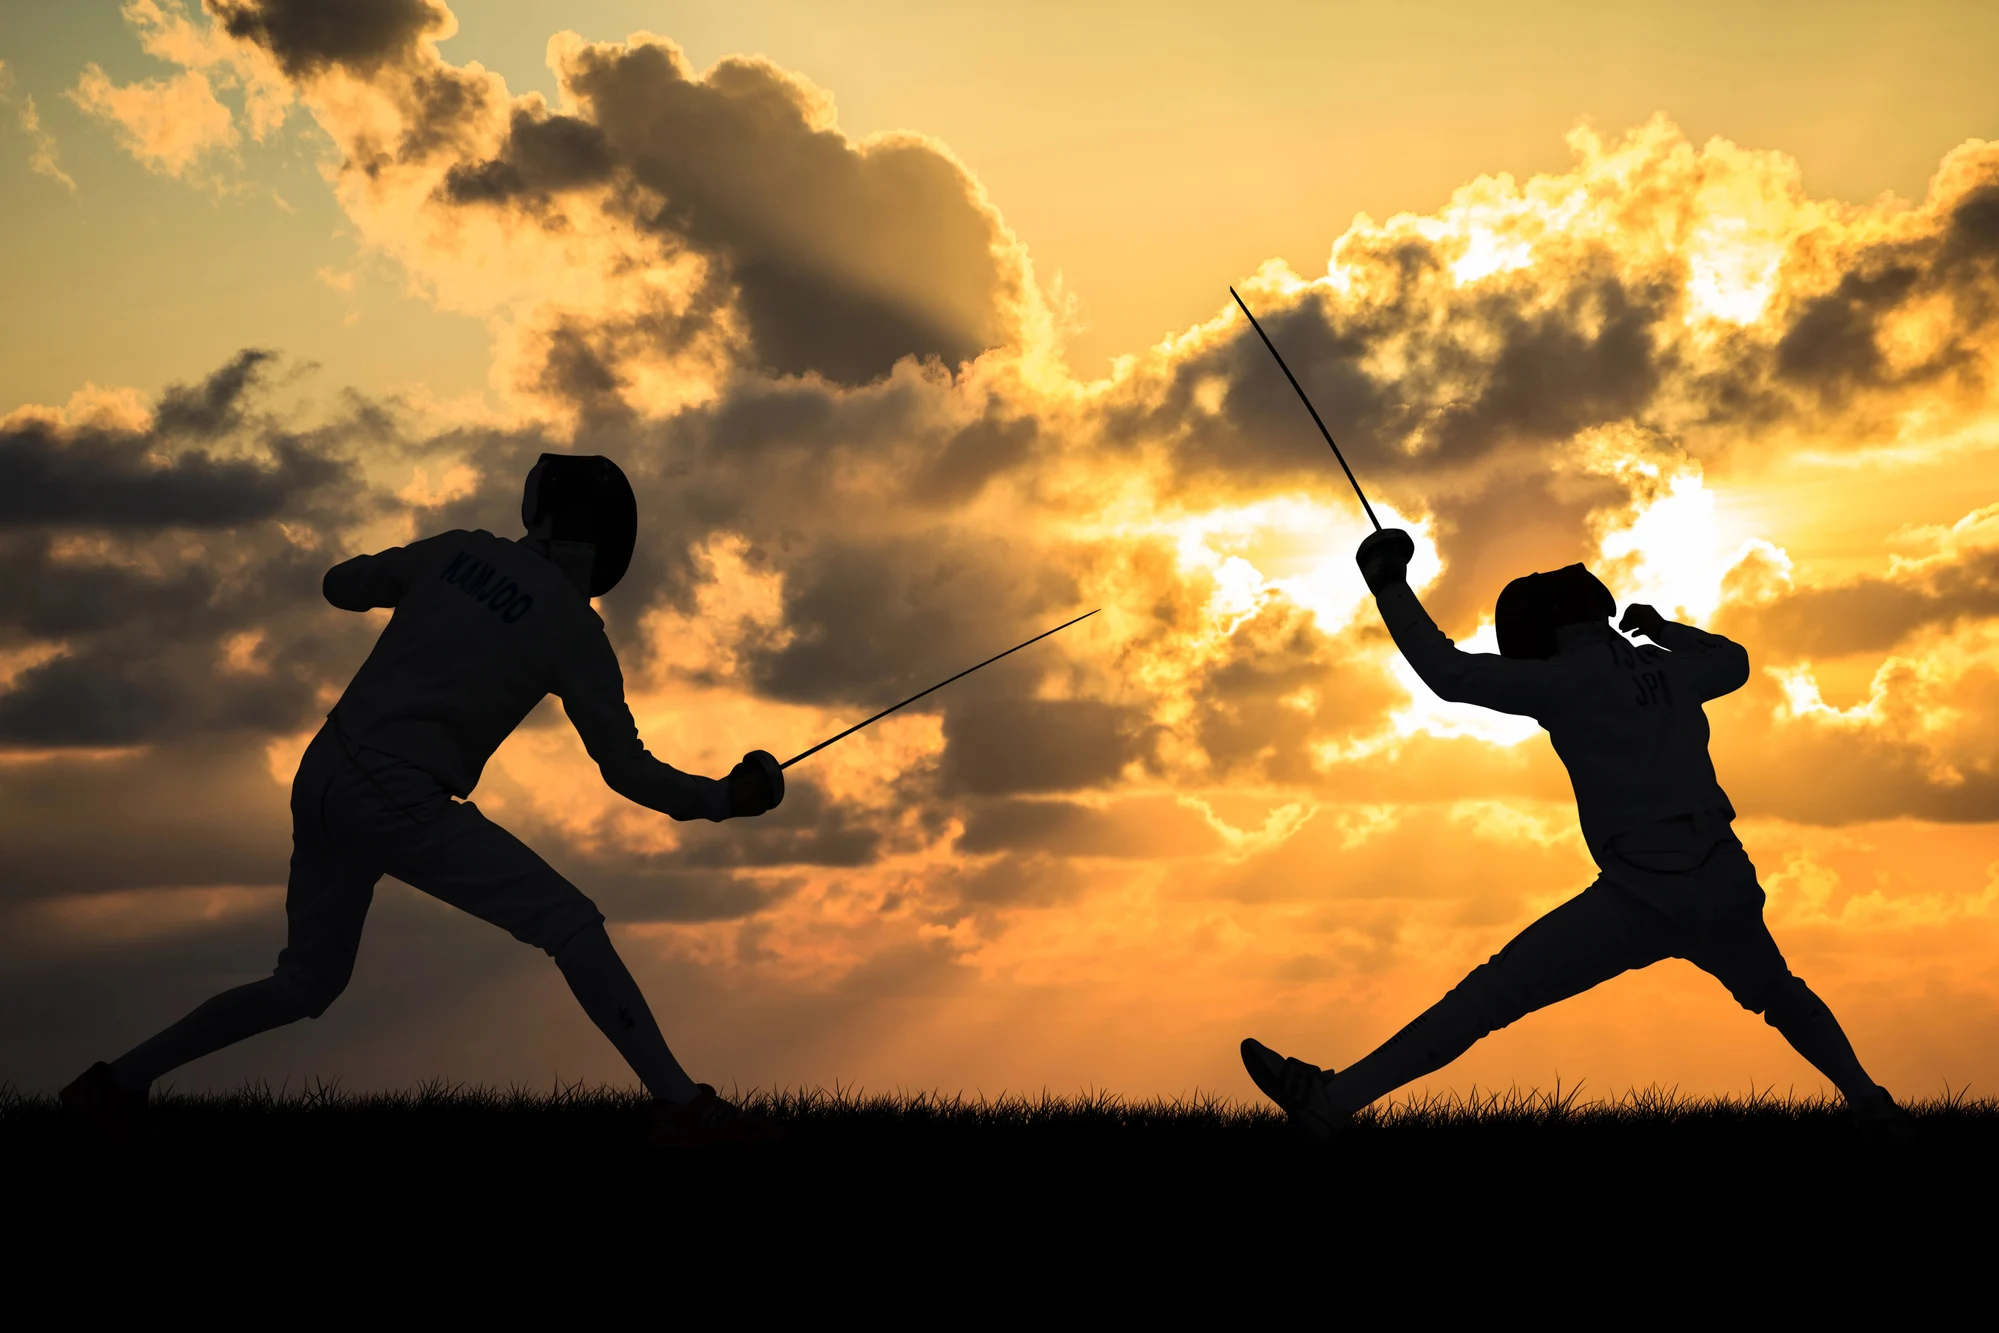 Two fencers dueling at sunset, silhouetted against a dramatic sky.